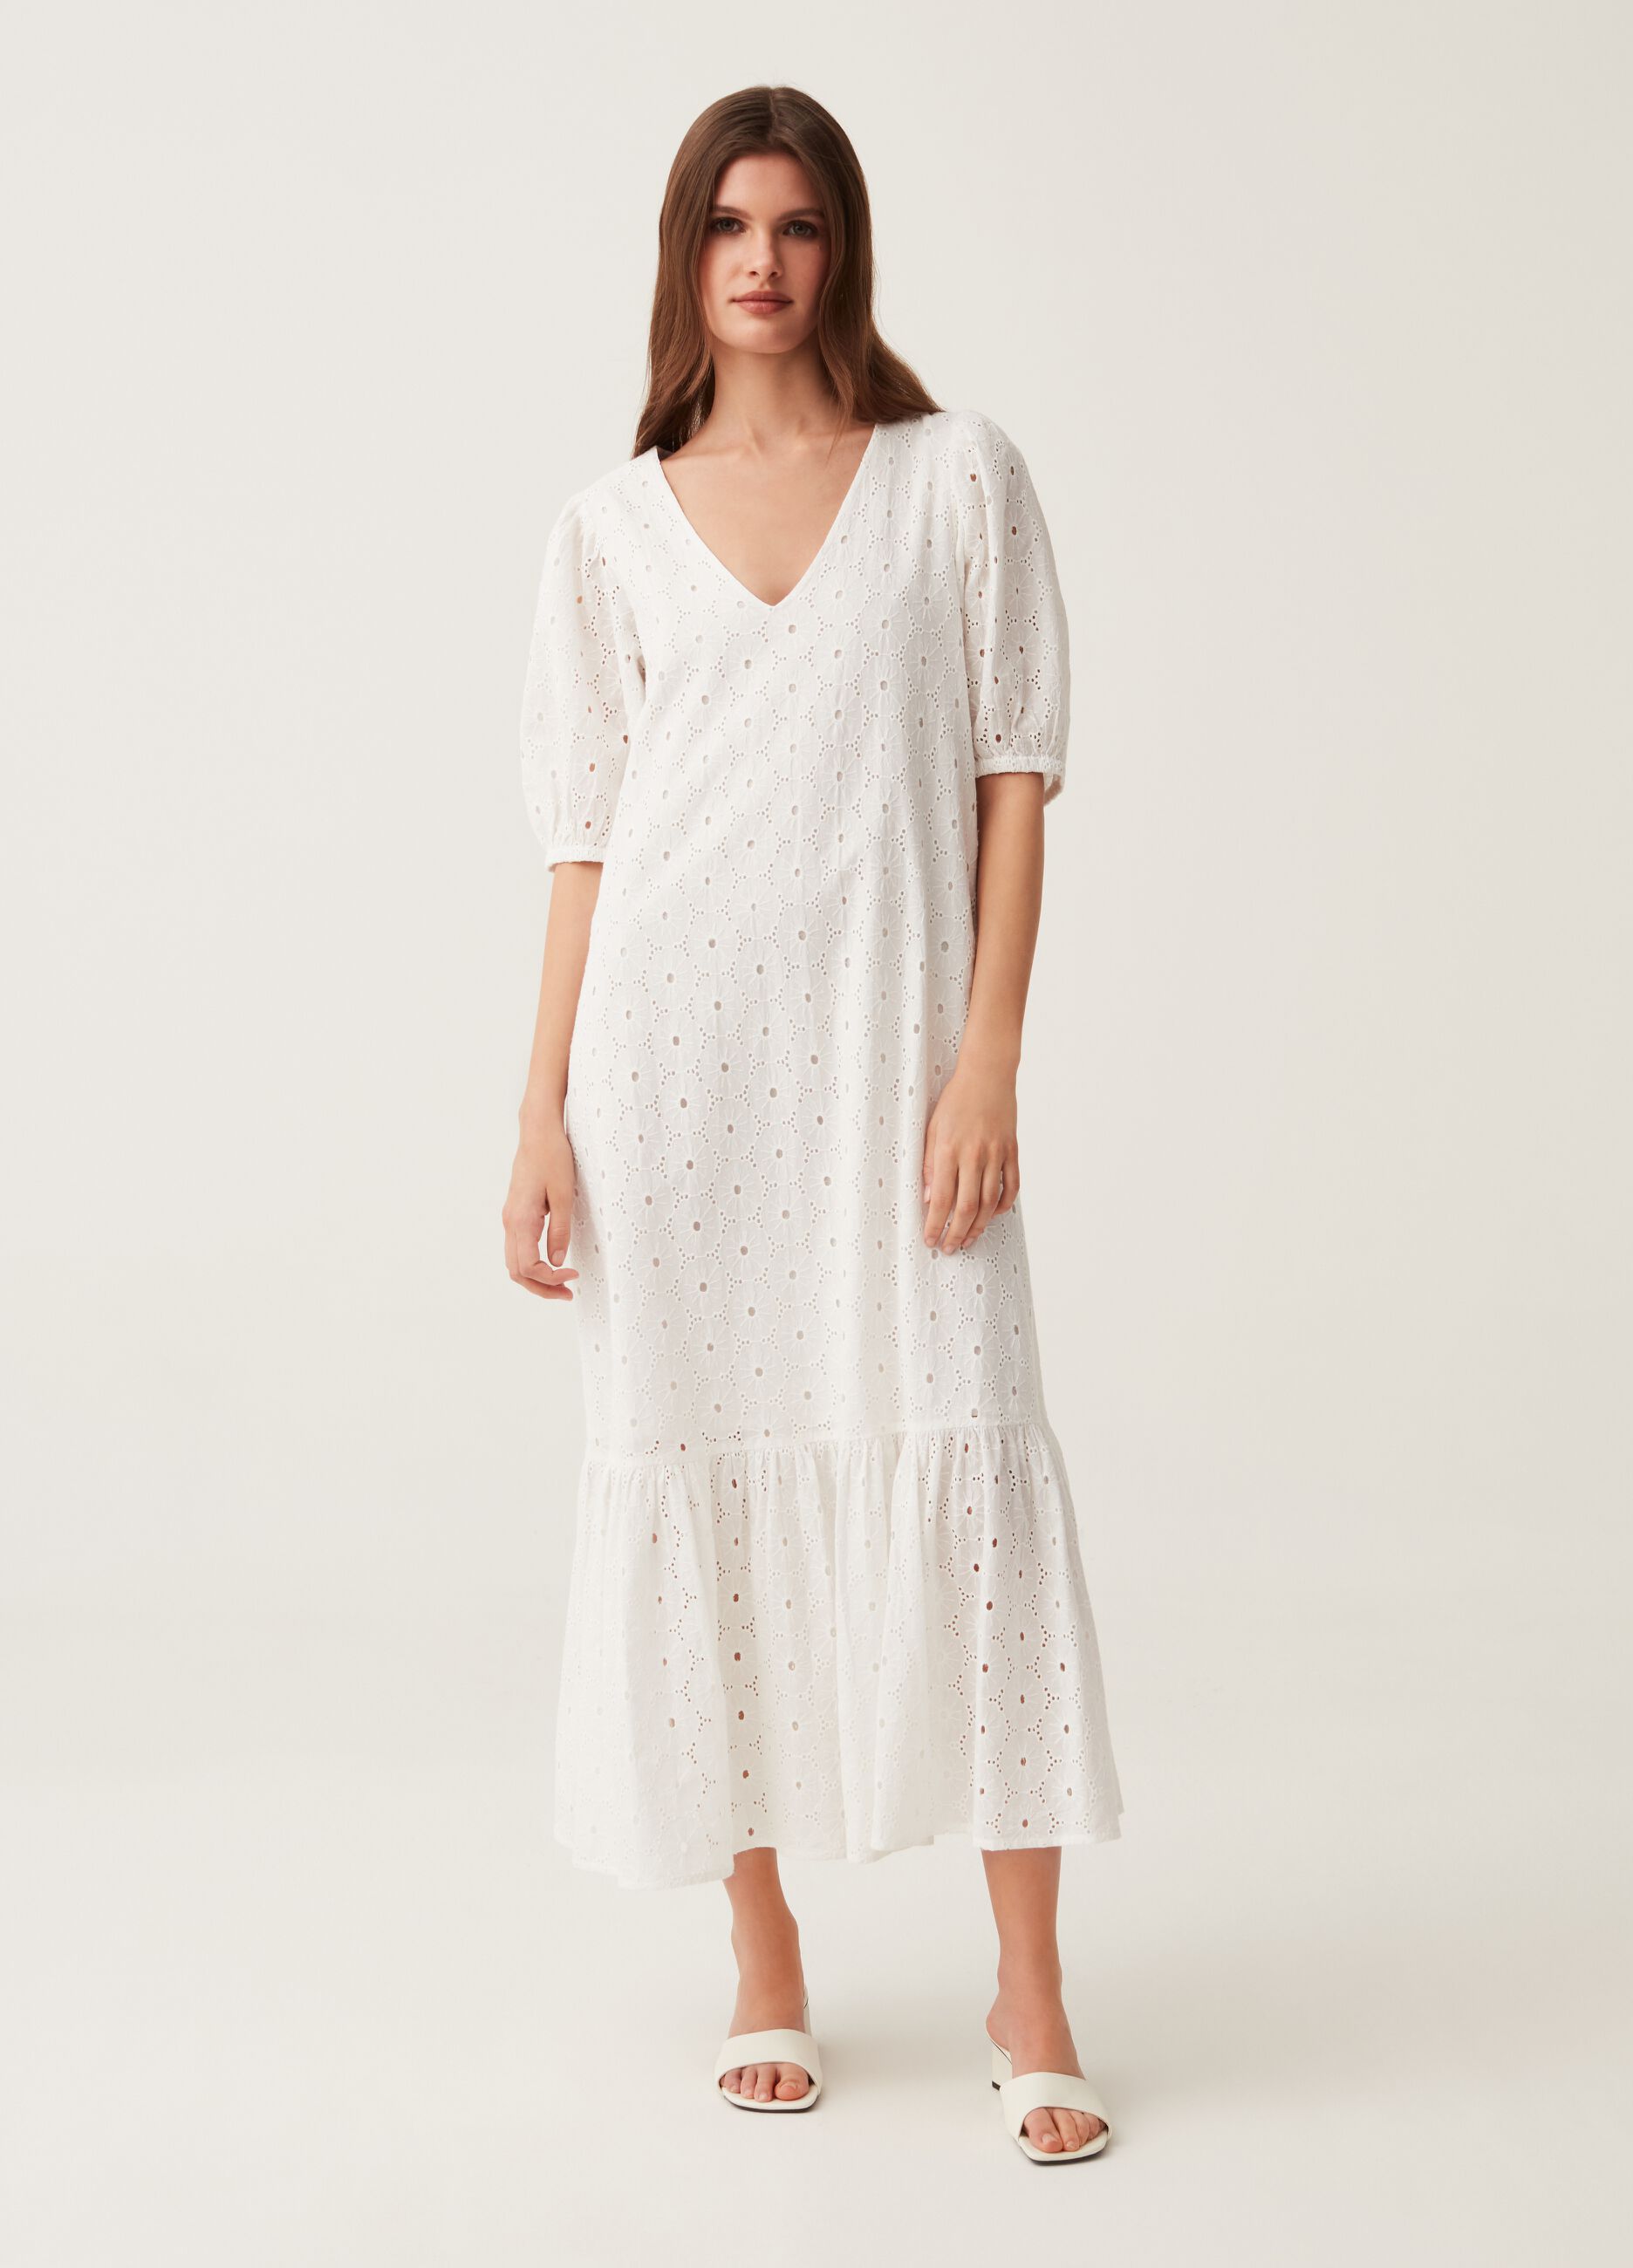 Long broderie anglaise dress.